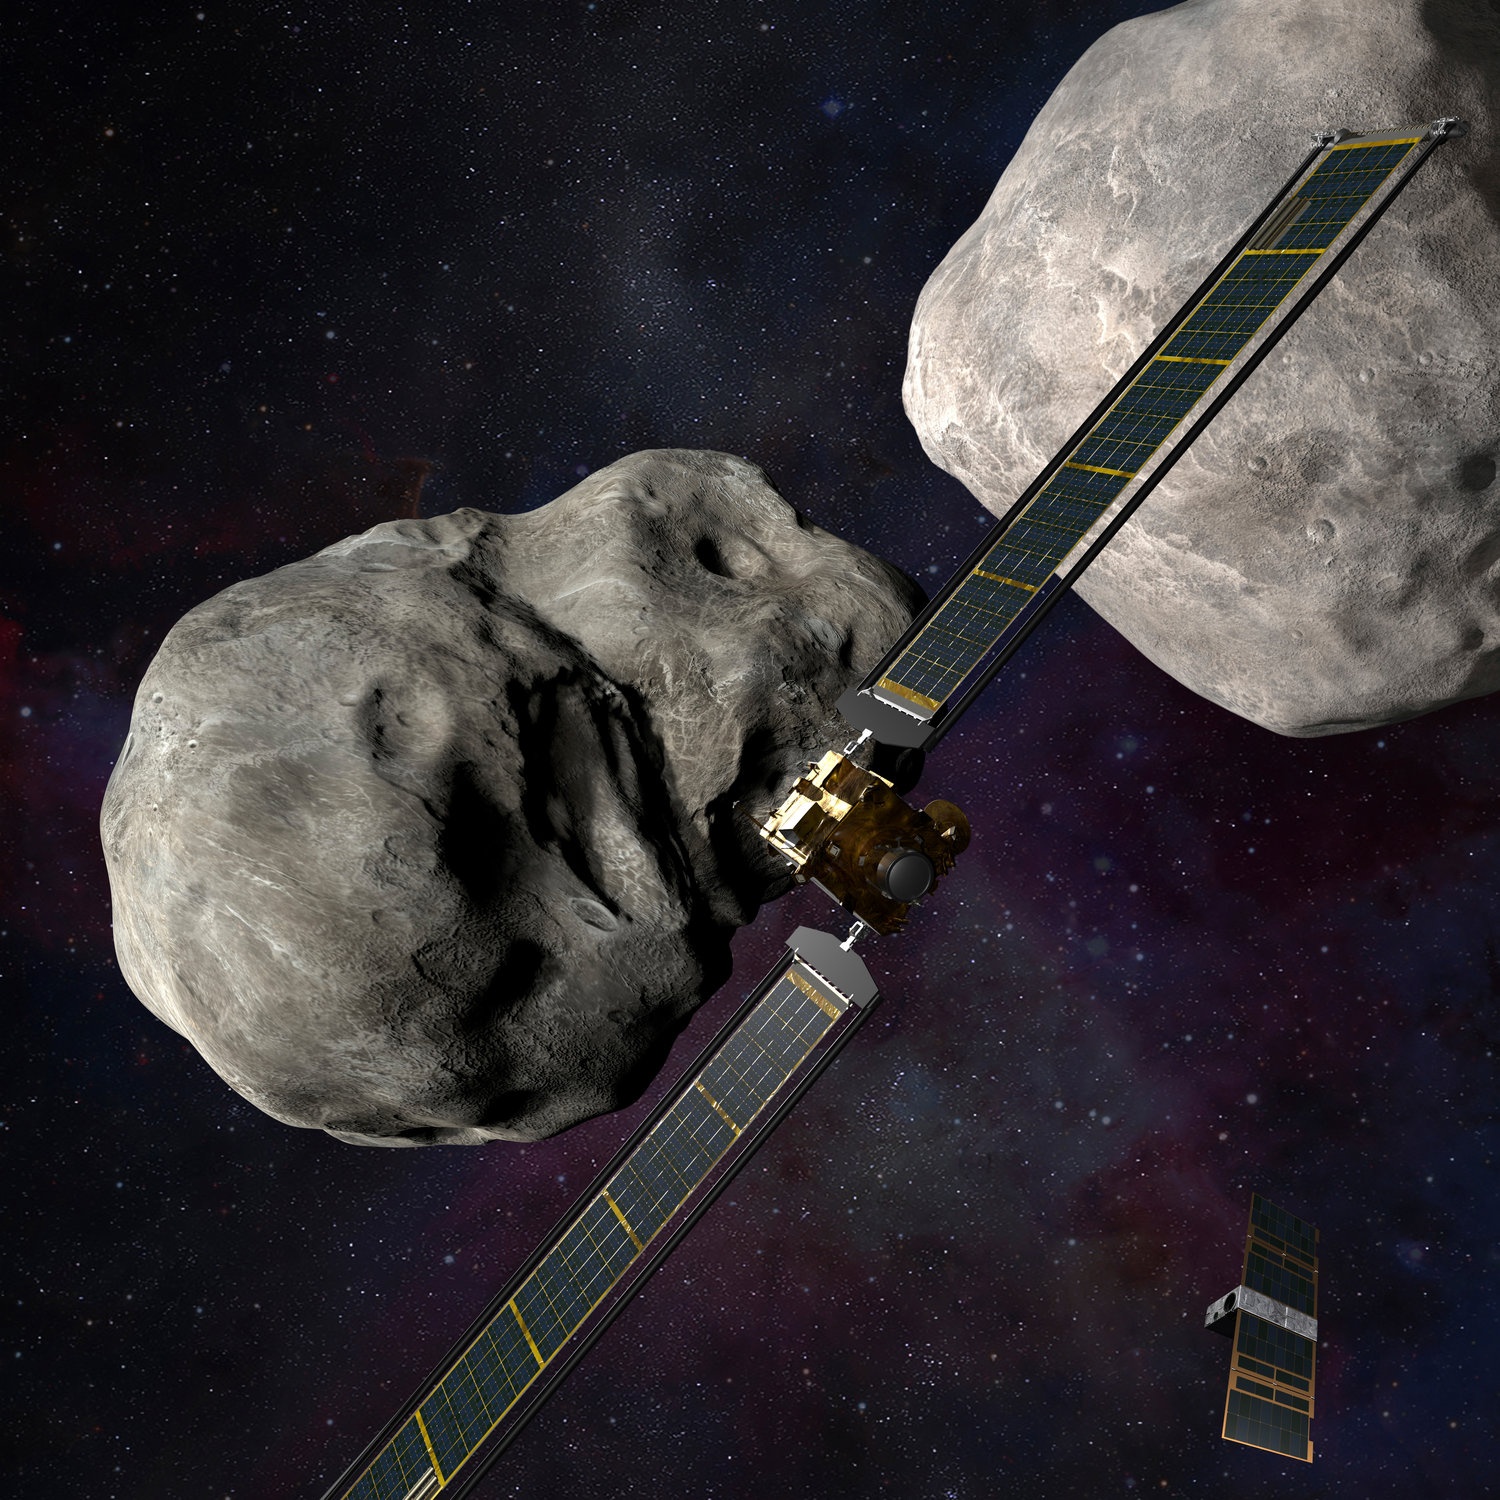 This illustration made available by Johns Hopkins APL and NASA depicts NASA's DART probe, center, and Italian Space Agency's (ASI) LICIACube, bottom right, at the Didymos system before impact with the asteroid Dimorphos, left. DART is expected to zero in on the asteroid Monday, Sept. 26, 2022, intent on slamming it head-on at 14,000 mph. The impact should be just enough to nudge the asteroid into a slightly tighter orbit around its companion space rock.